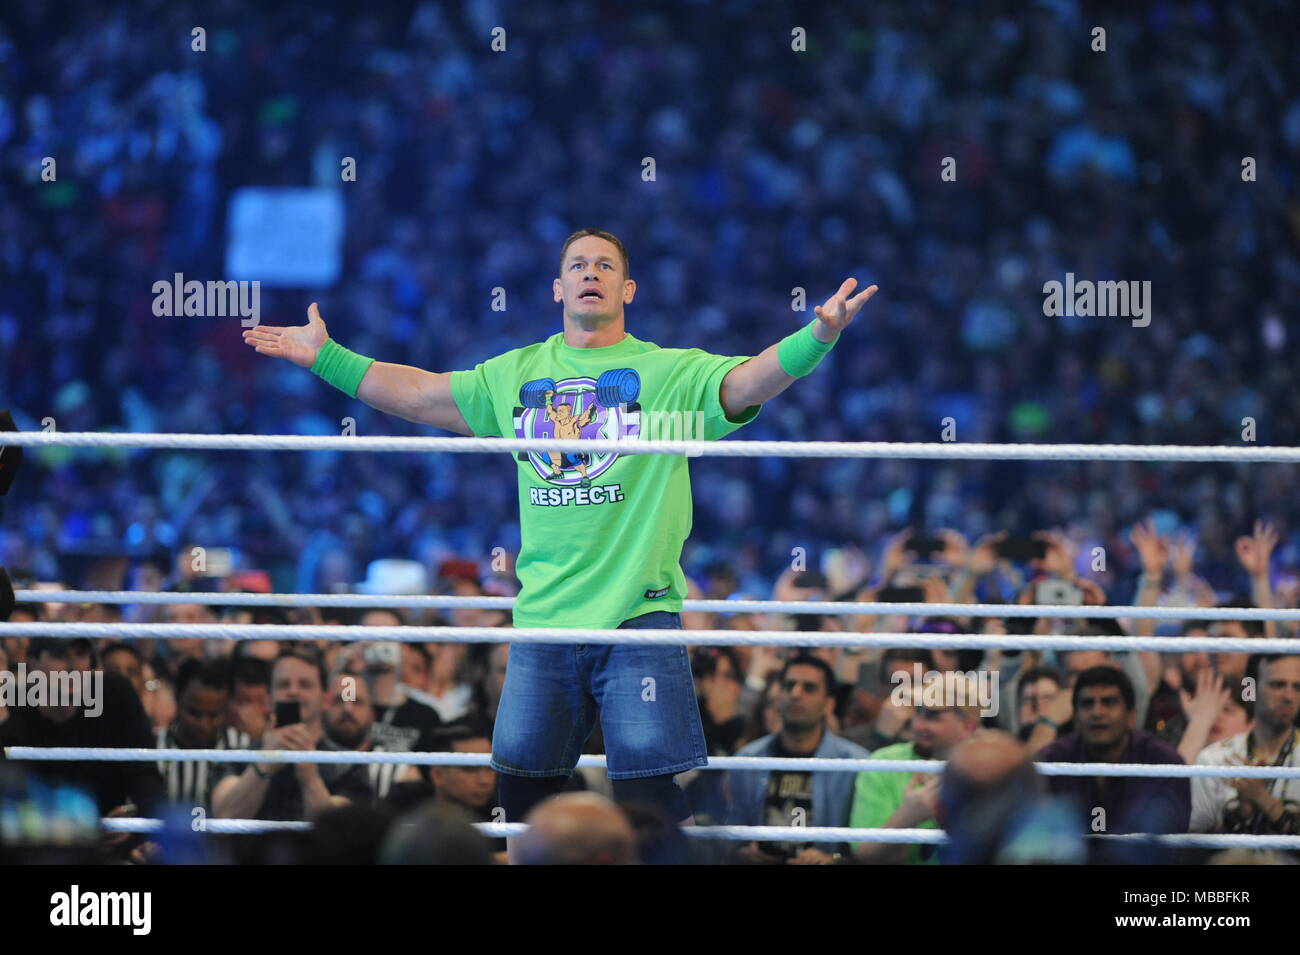 New Orleans, LA, USA. 8th Apr, 2018. John Cena at WWE Wrestlemania 34 at the Mercedes-Benz Superdome in New Orleans, Louisiana on April 8, 2018. Credit: George Napolitano/Media Punch/Alamy Live News Stock Photo